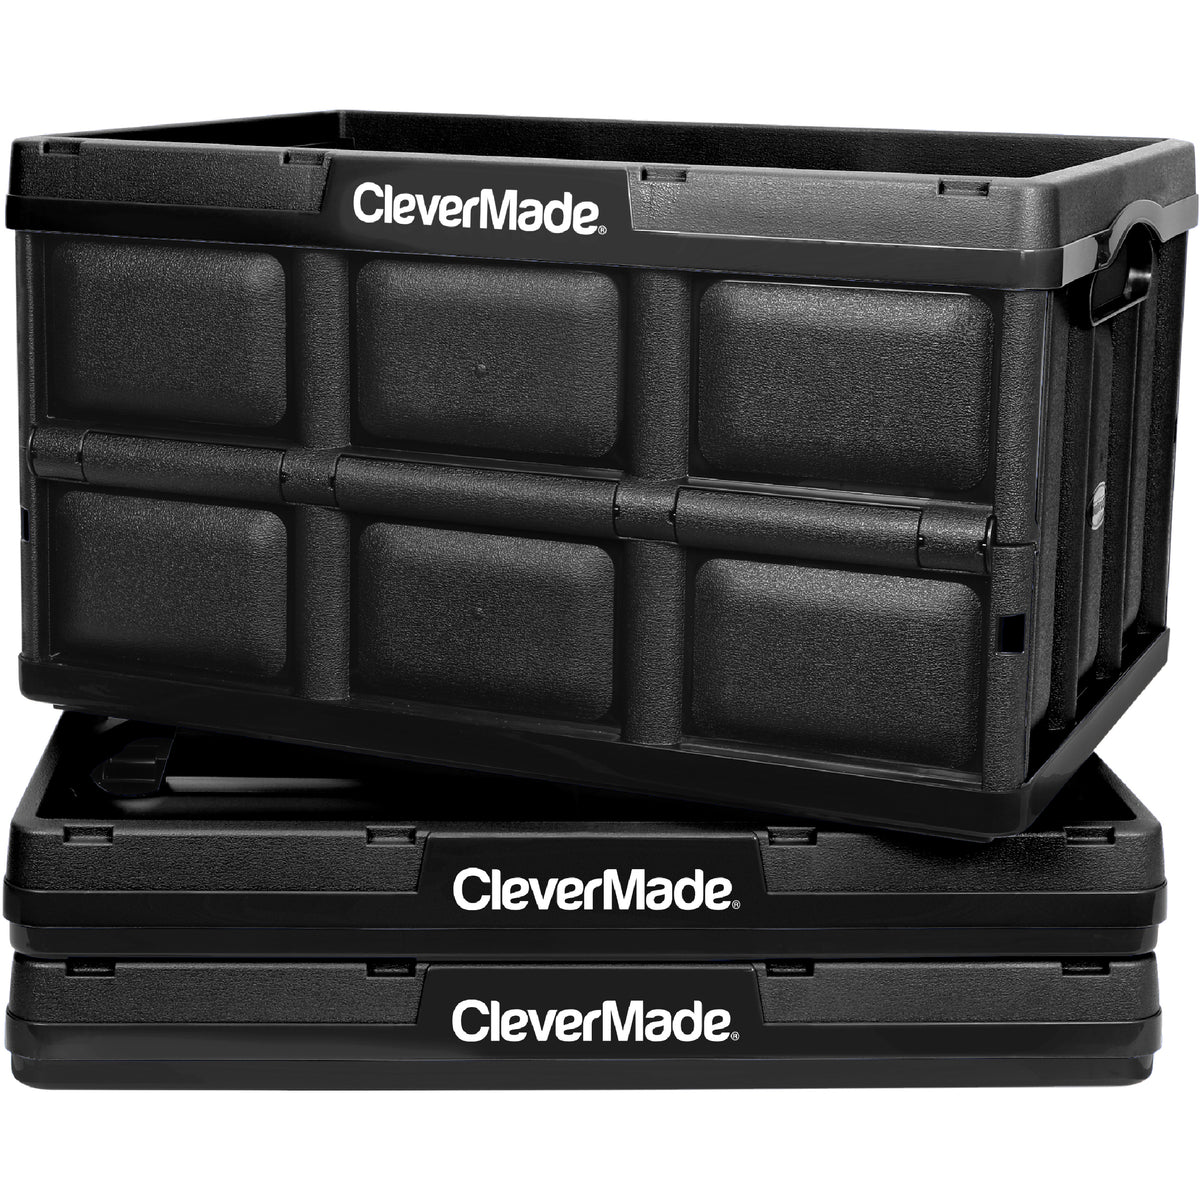 CleverMade Collapsible Milk Crate, Black, 3PK - 25L (6 Gal) Stackable  Storage Bins, Holds 50lbs Per Bin - Clevercrates are Heavy Duty, Plastic